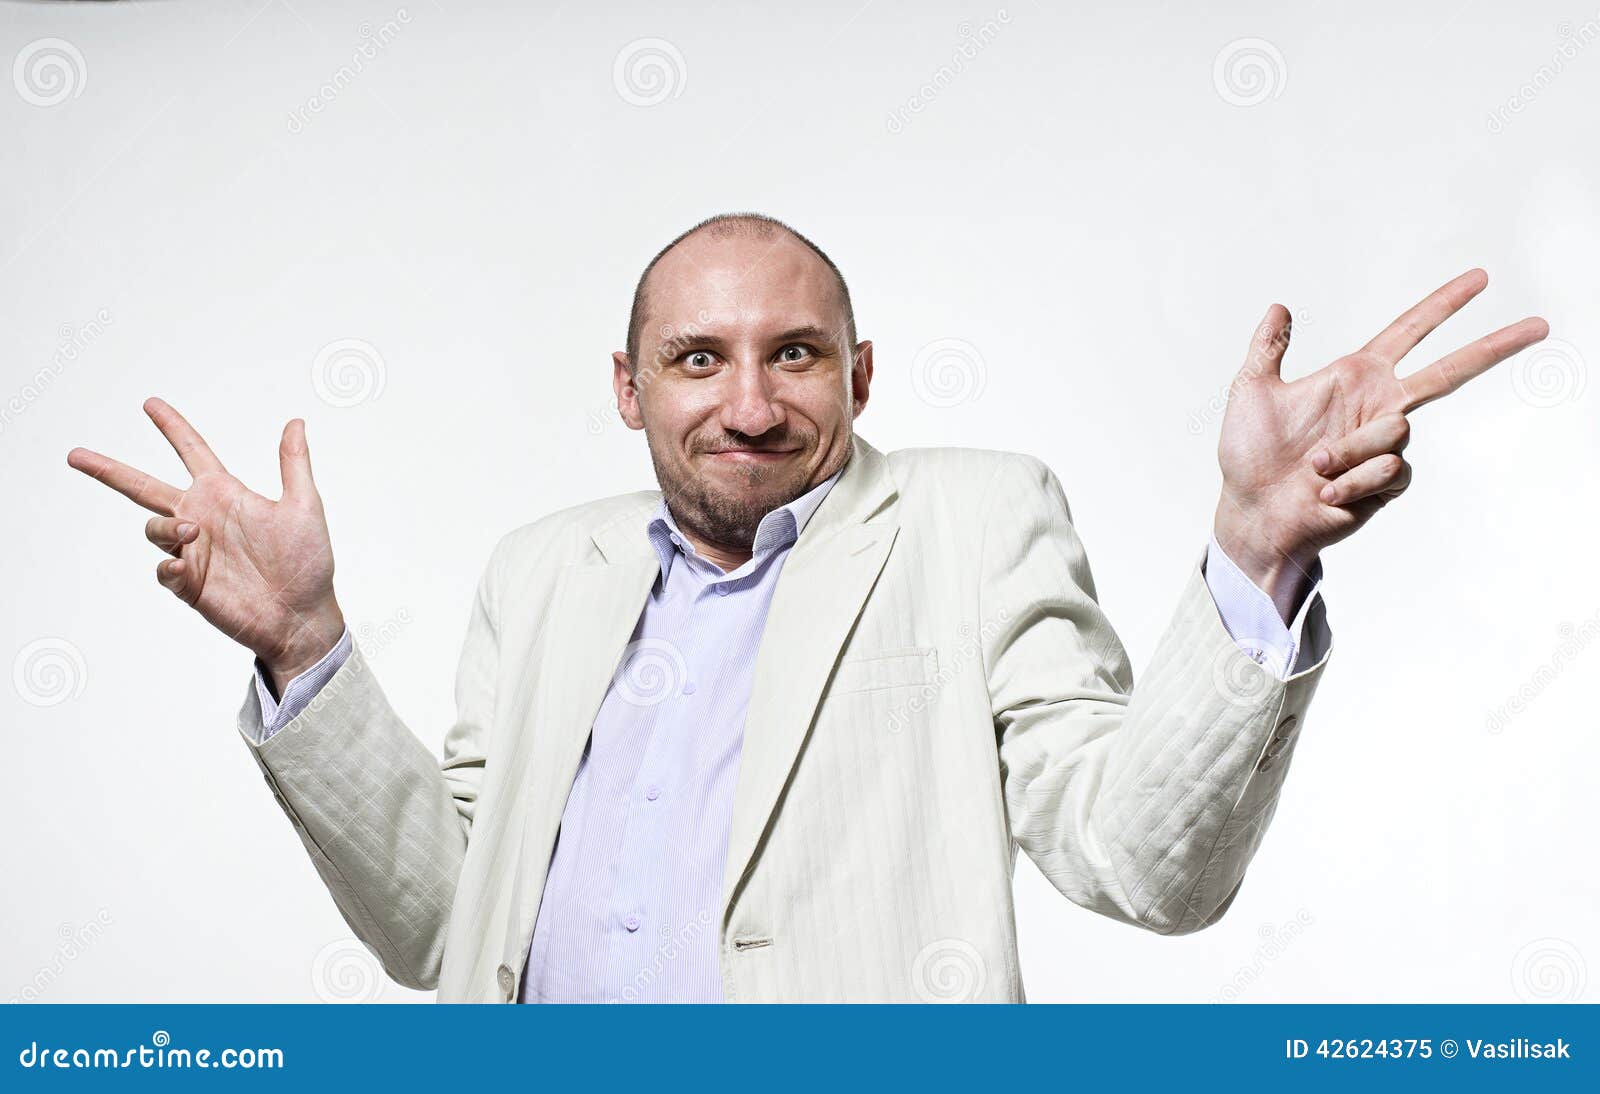 shrugging man in doubt and surprise doing shrug showing open palms